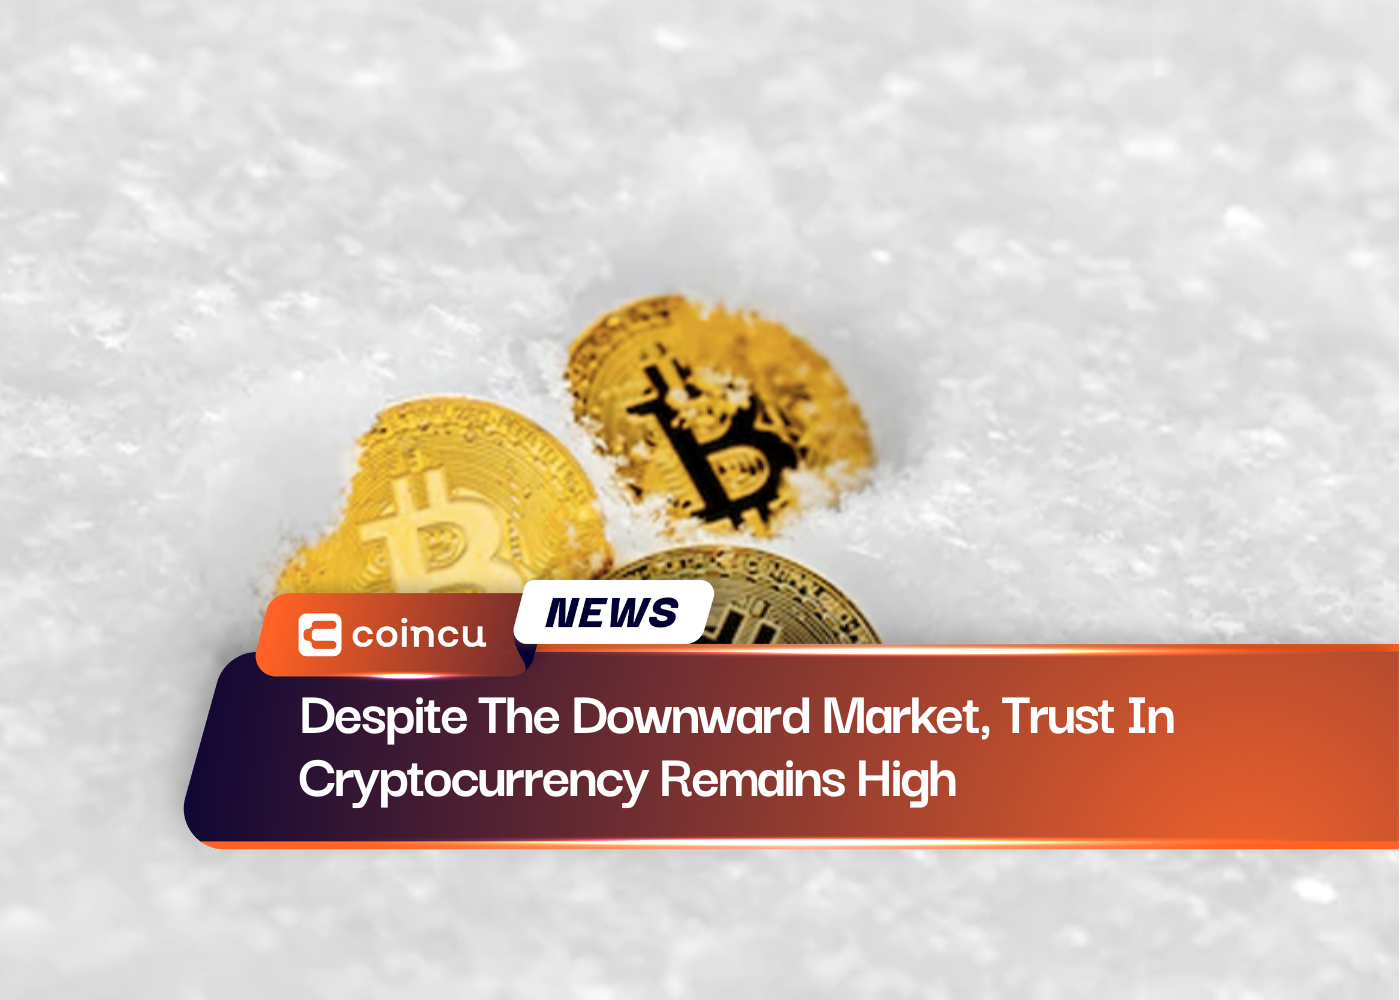 Despite The Downward Market, Trust In Cryptocurrency Remains High